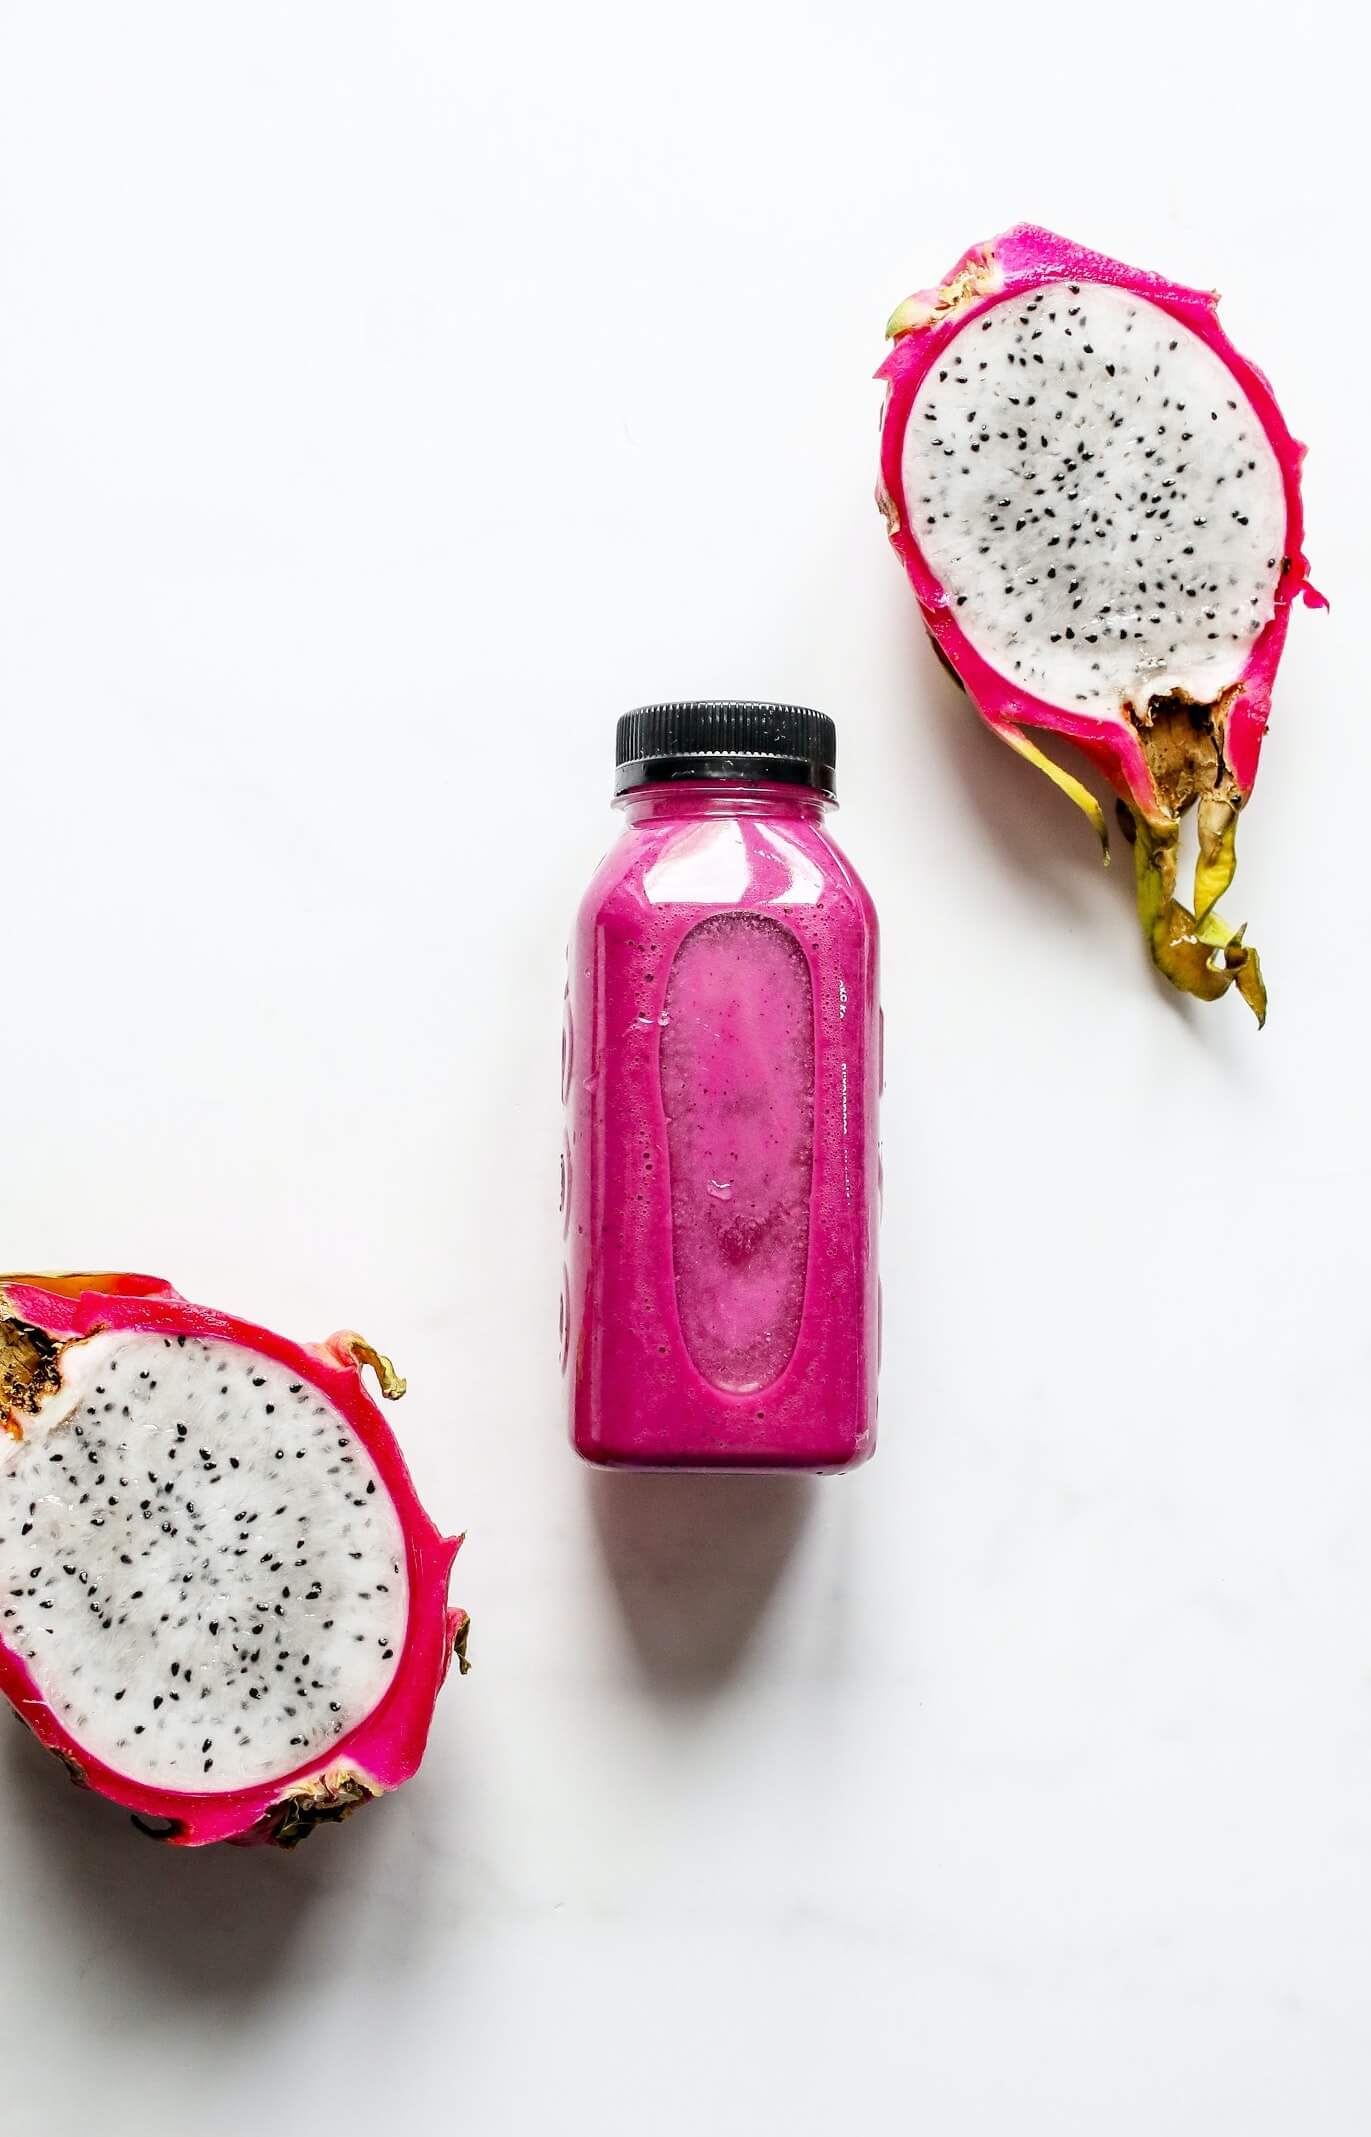 Bottle with Pink Smoothie Between Halves of Dragon Fruit